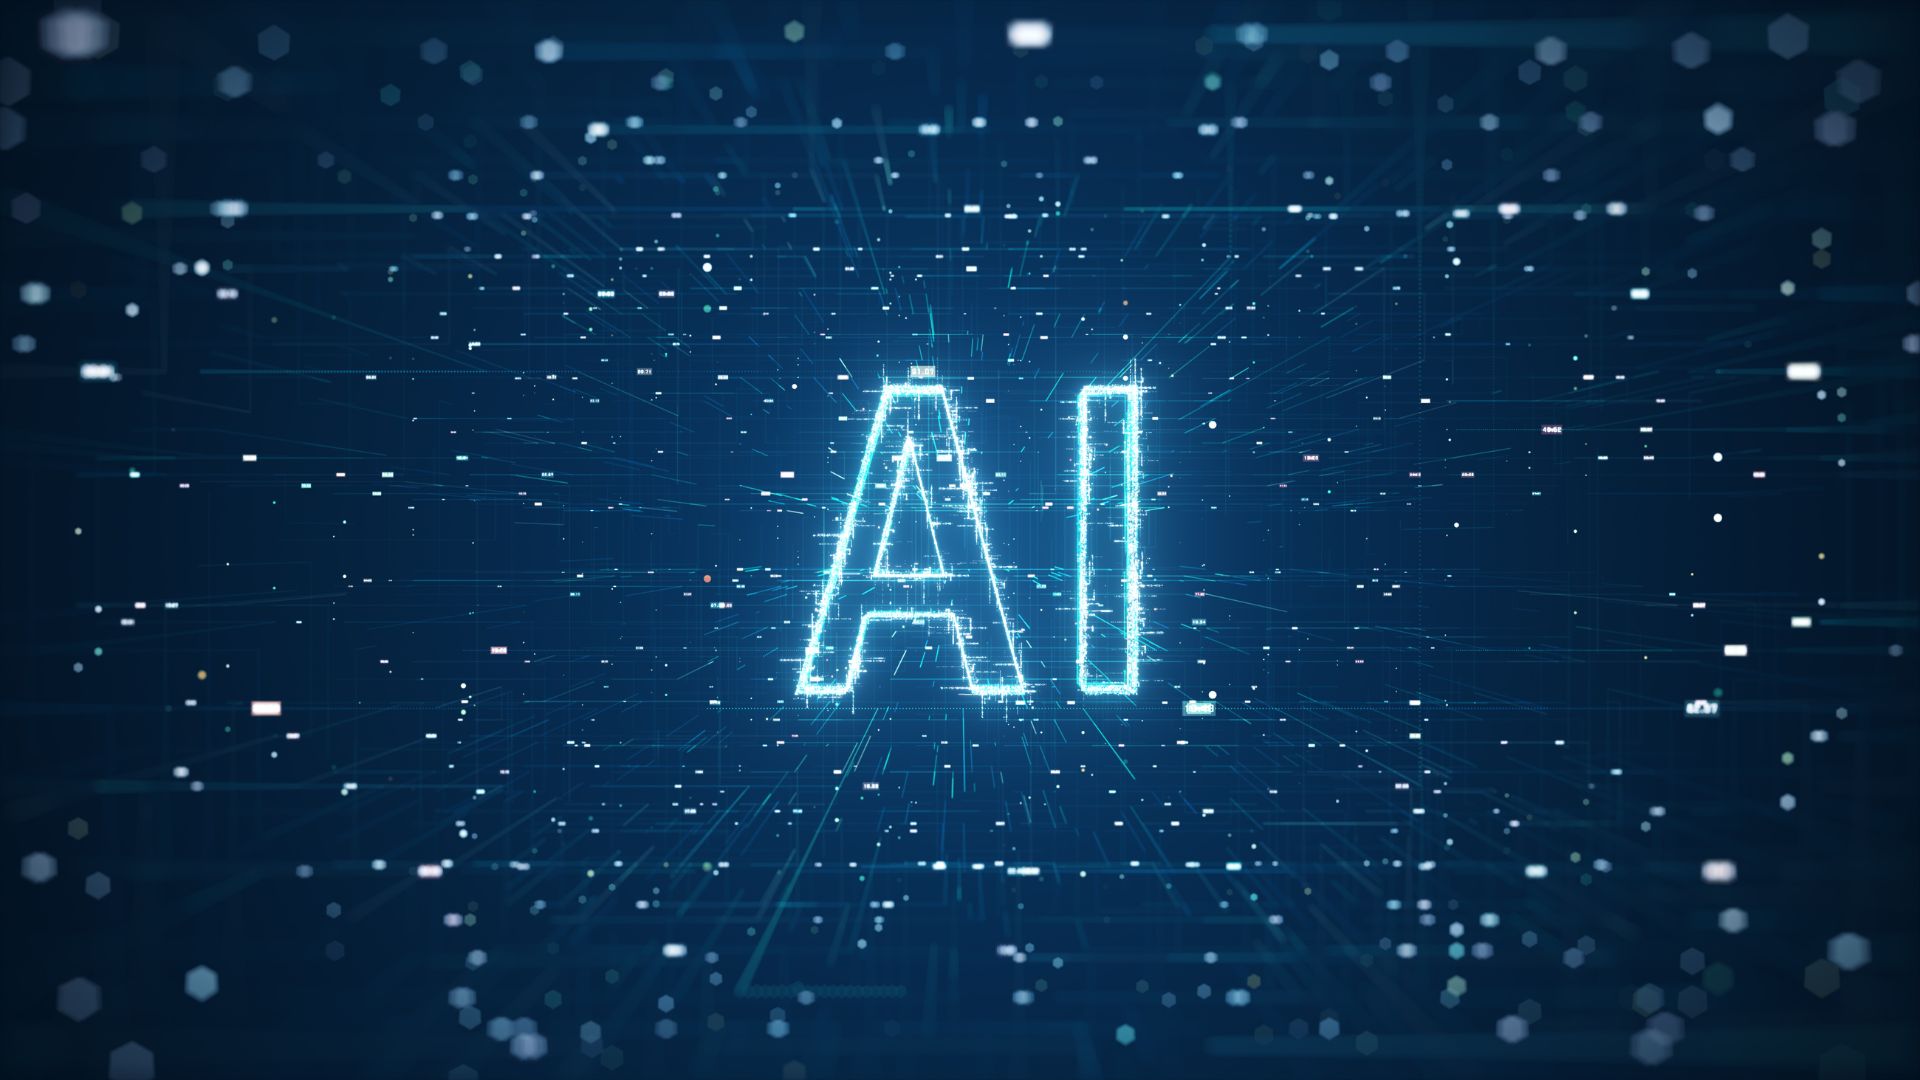 A stock photo with the word "AI" on it.